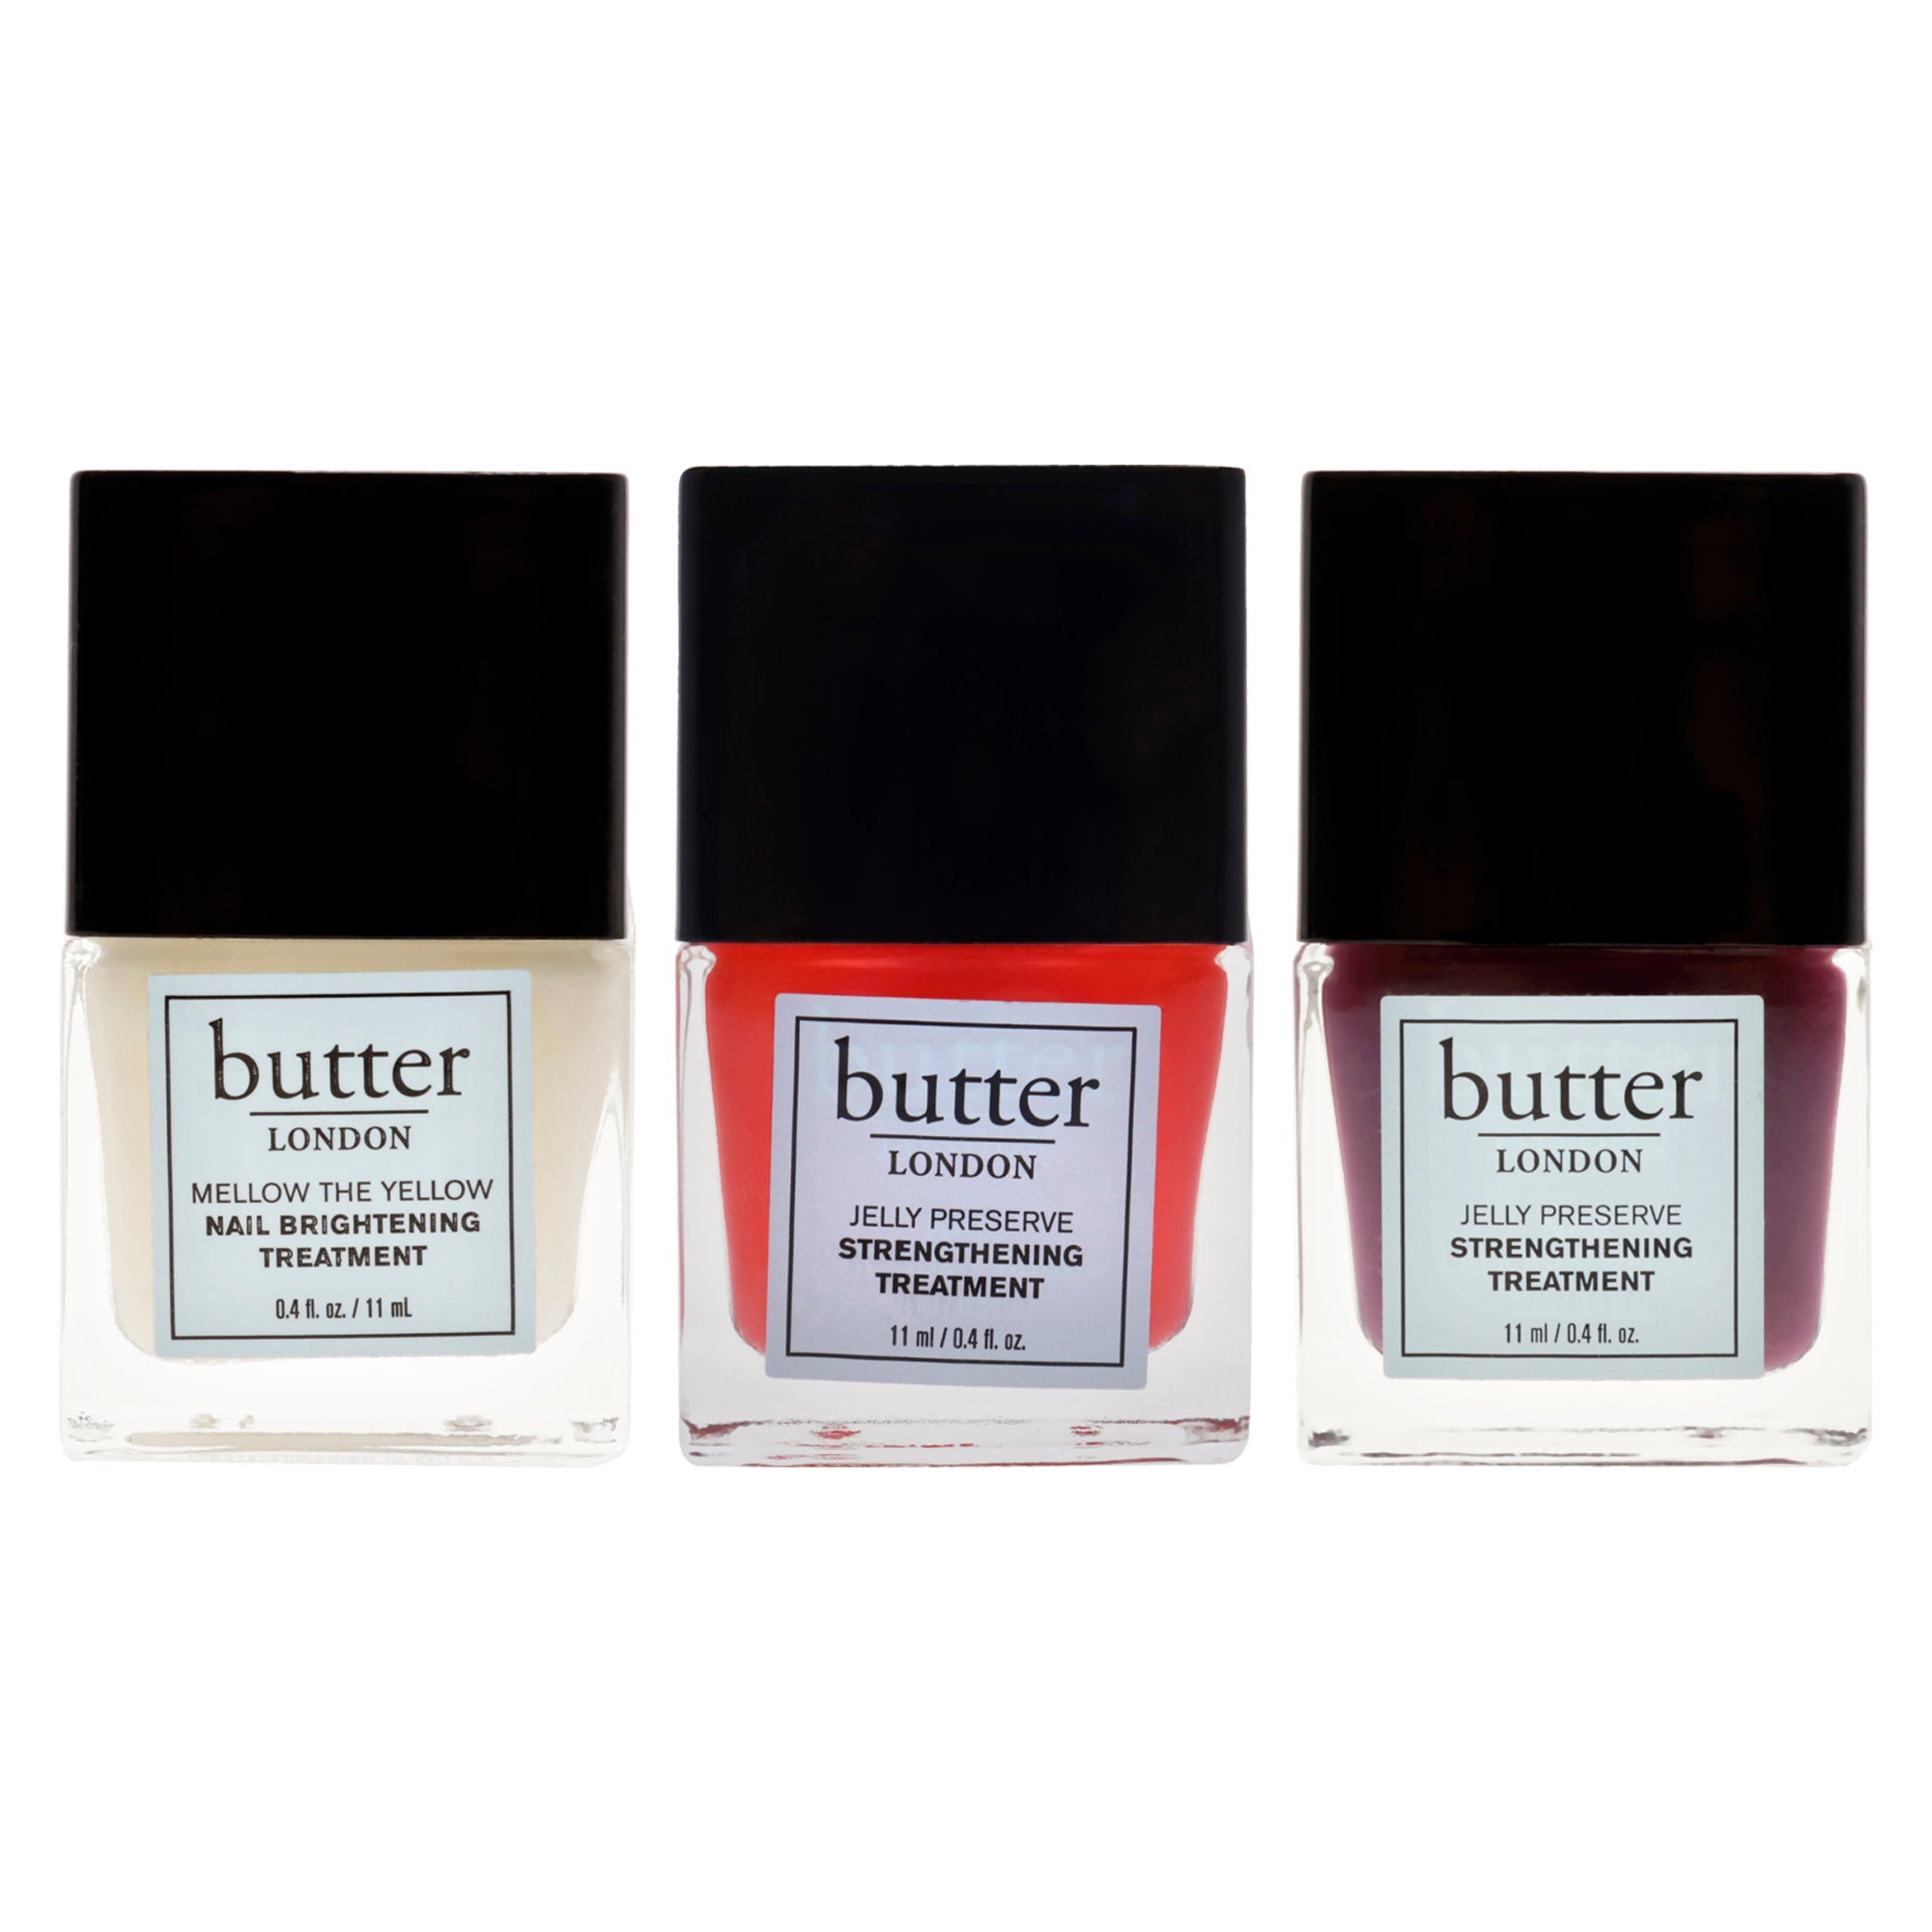 Nail Brightening Treatment and Jelly Preserve Strengthening Treatment Kit by Butter London for Women - 3 Pc Kit 0.4 oz Nail Treatment - Mellow The Yellow, 0.4 oz Nail Treatment - Victoria Plum, 0.4 oz Nail Treatment - Strawberry Rhubarb